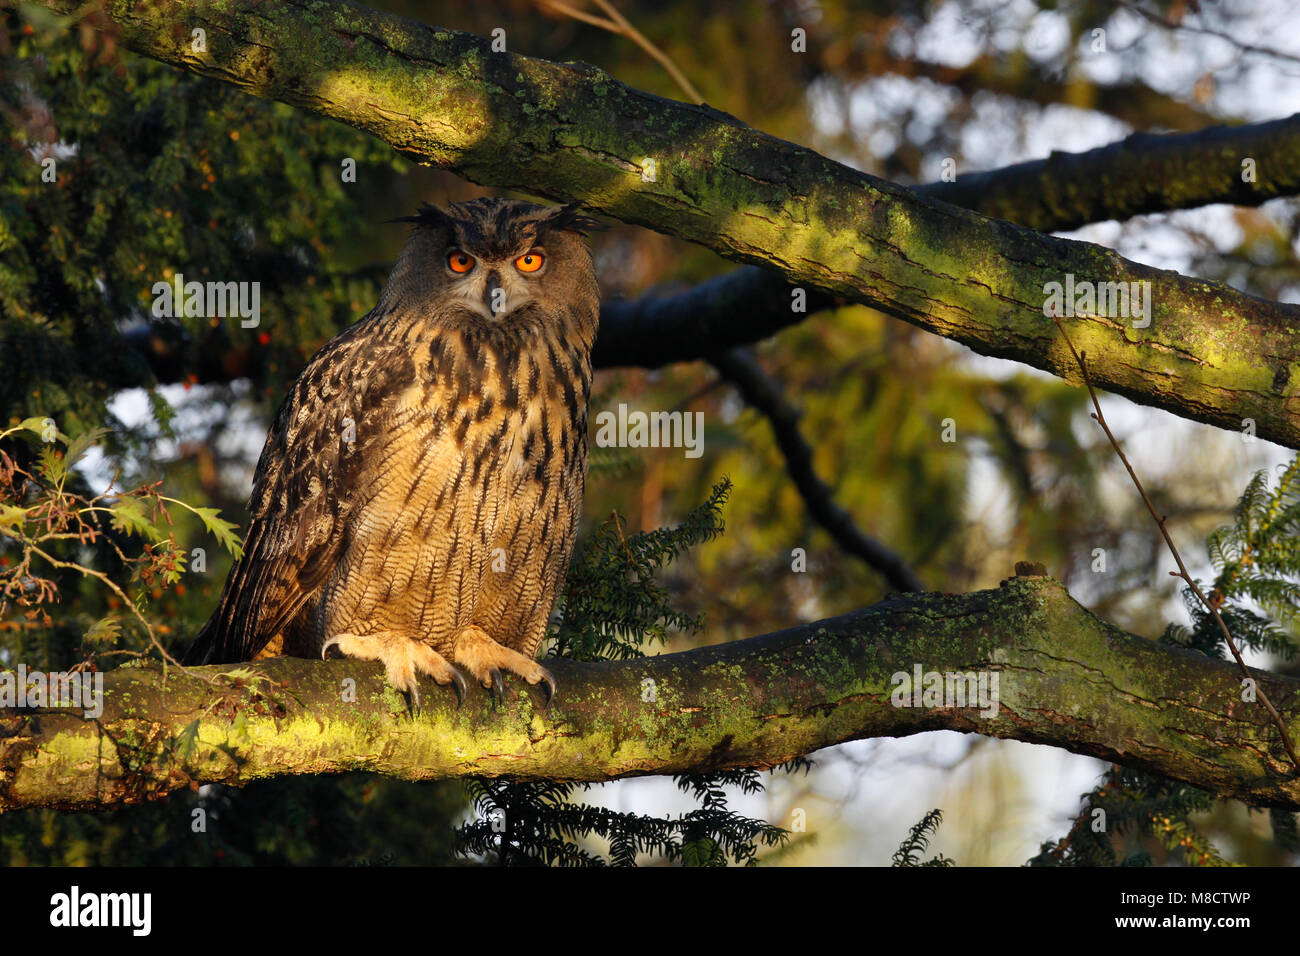 Oehoe zittend in boom in Nederland; Eurasian Eagle Owl perched in tree in Netherlands Stock Photo